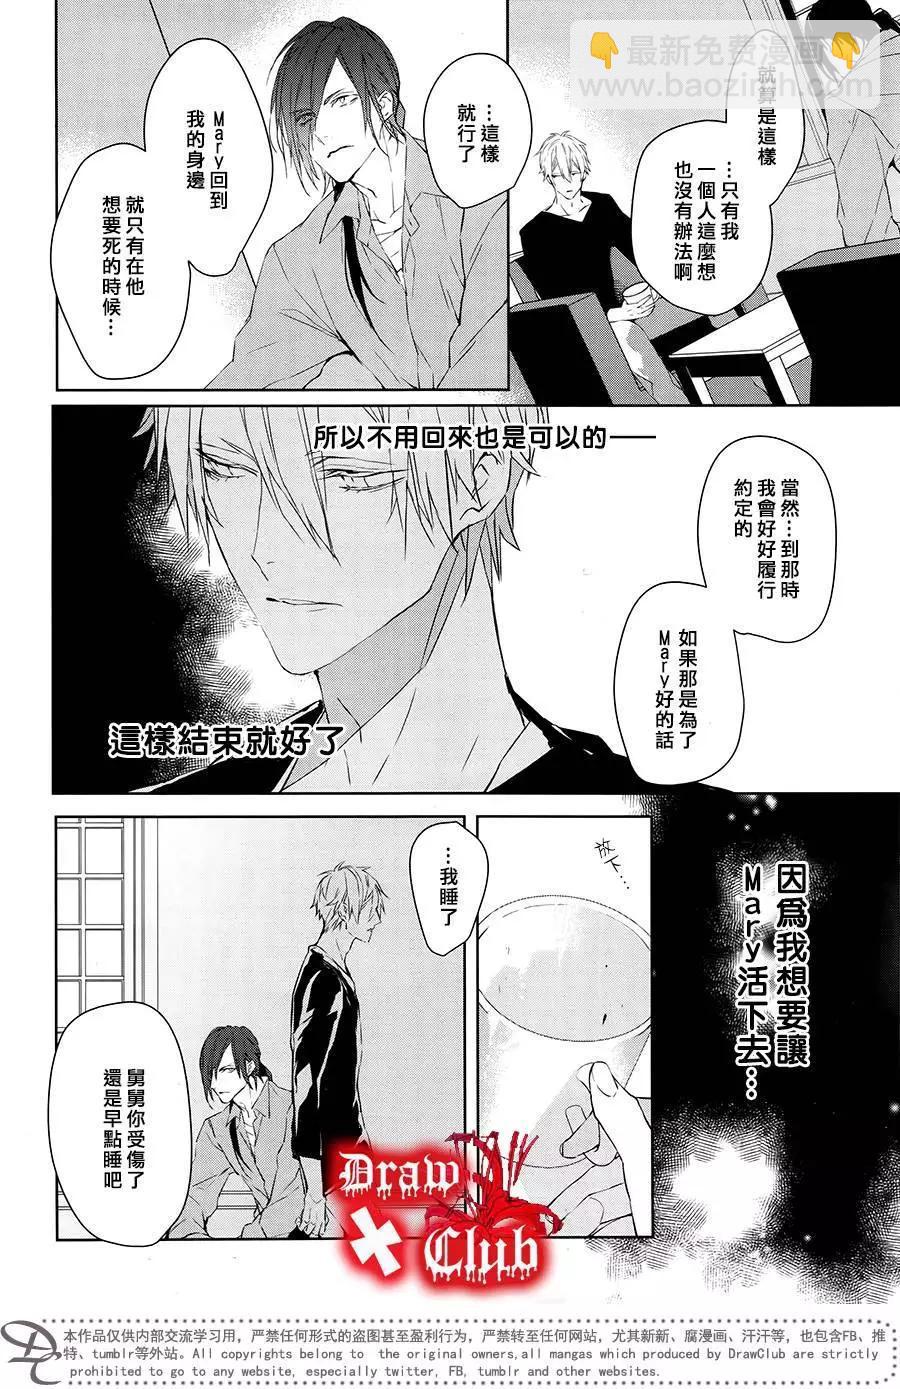 Bloody Mary - 第37回 - 1